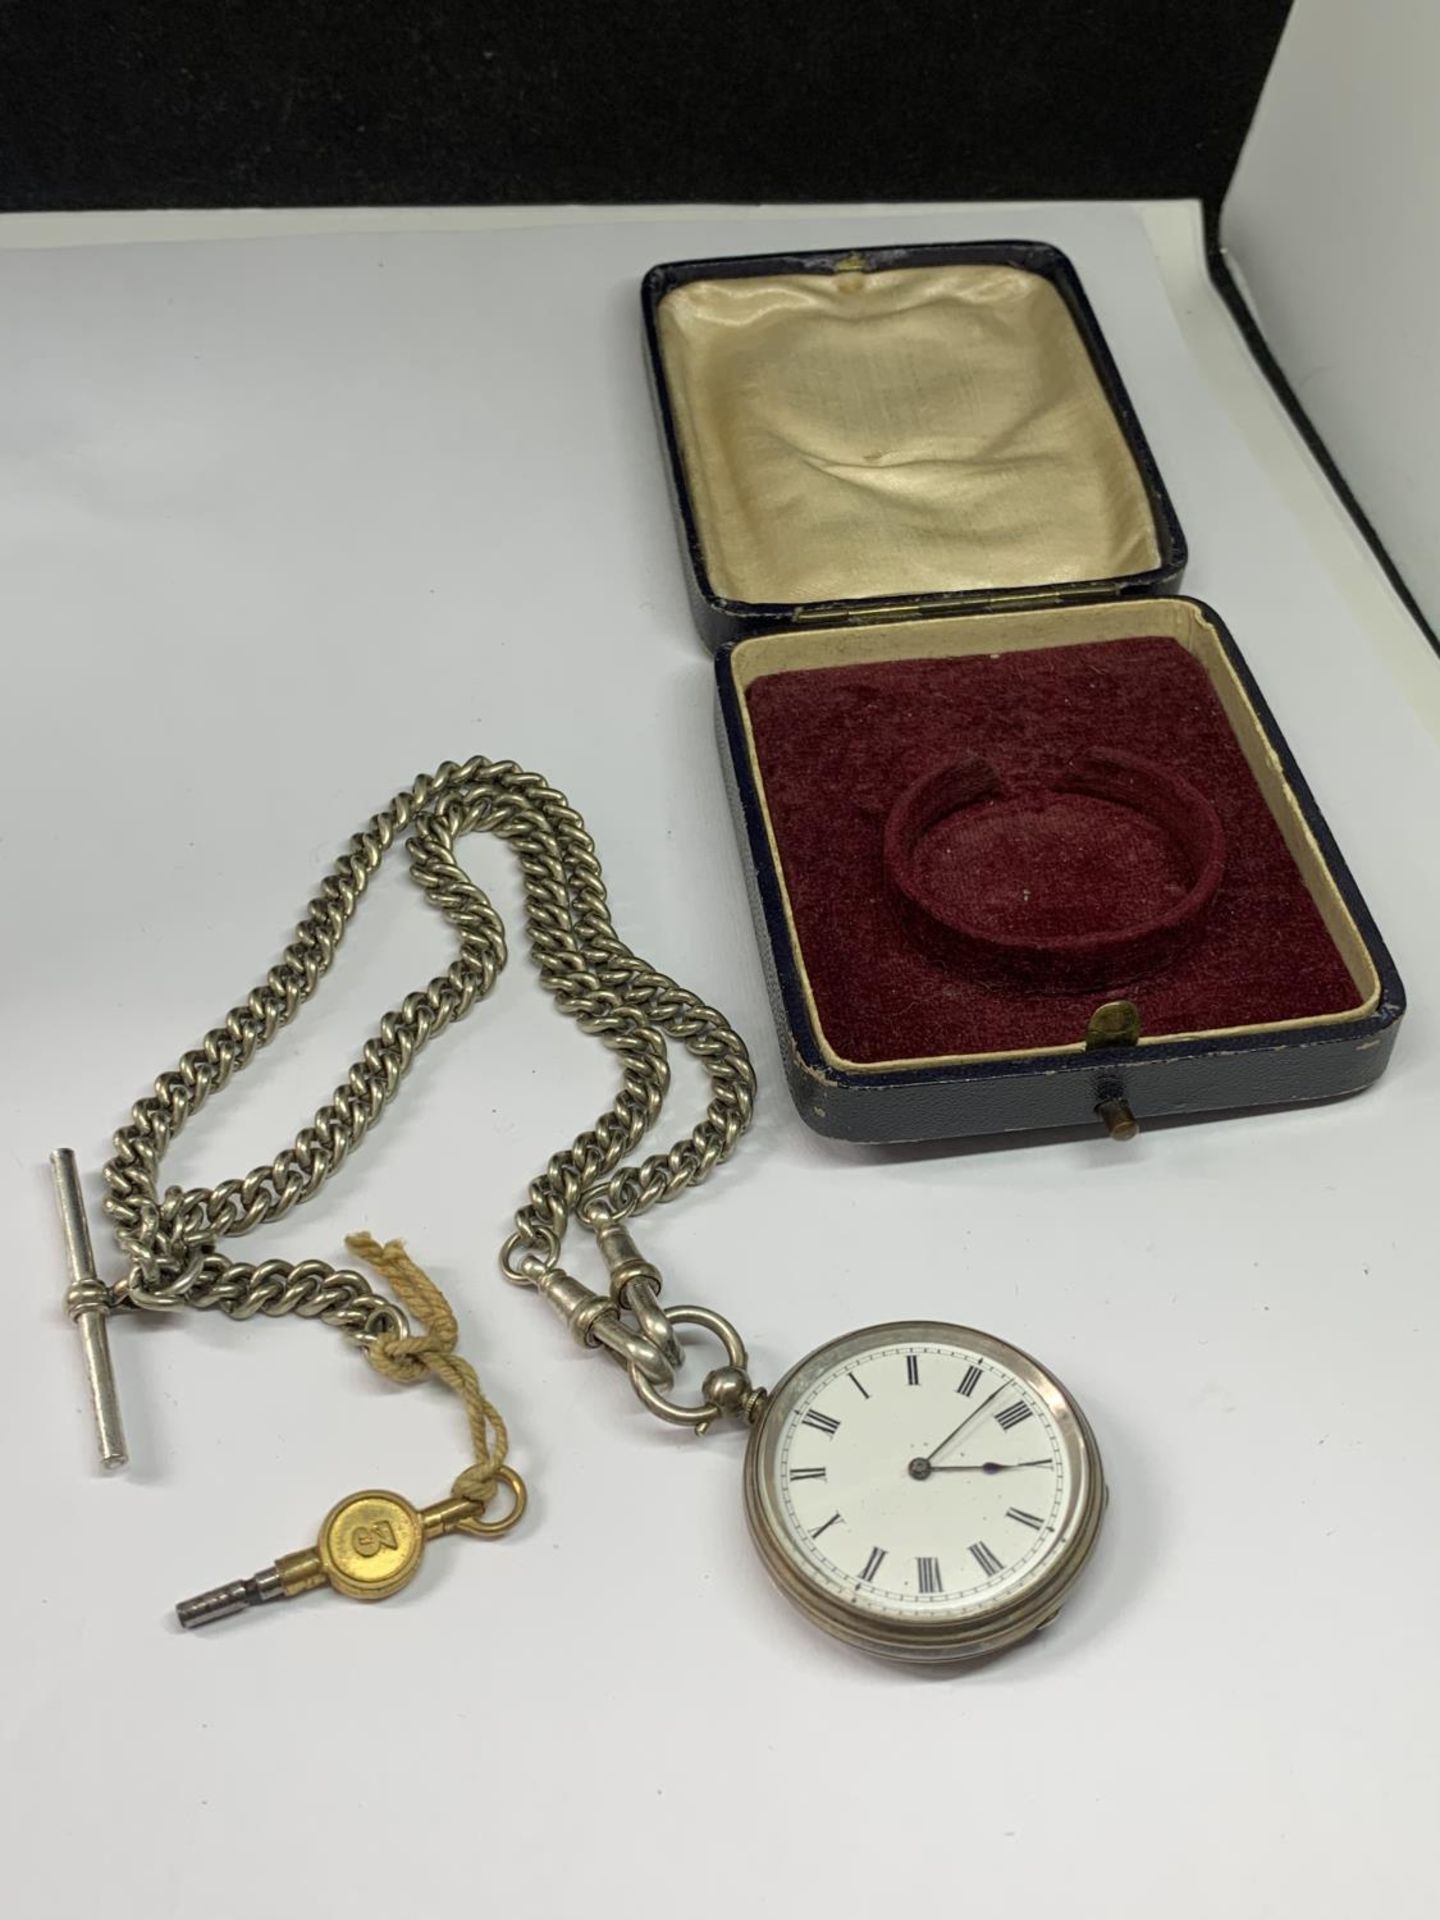 A SILVER POCKET WATCH WITH ALBERT CHAIN AND KEY IN A PRESENTATION BOX